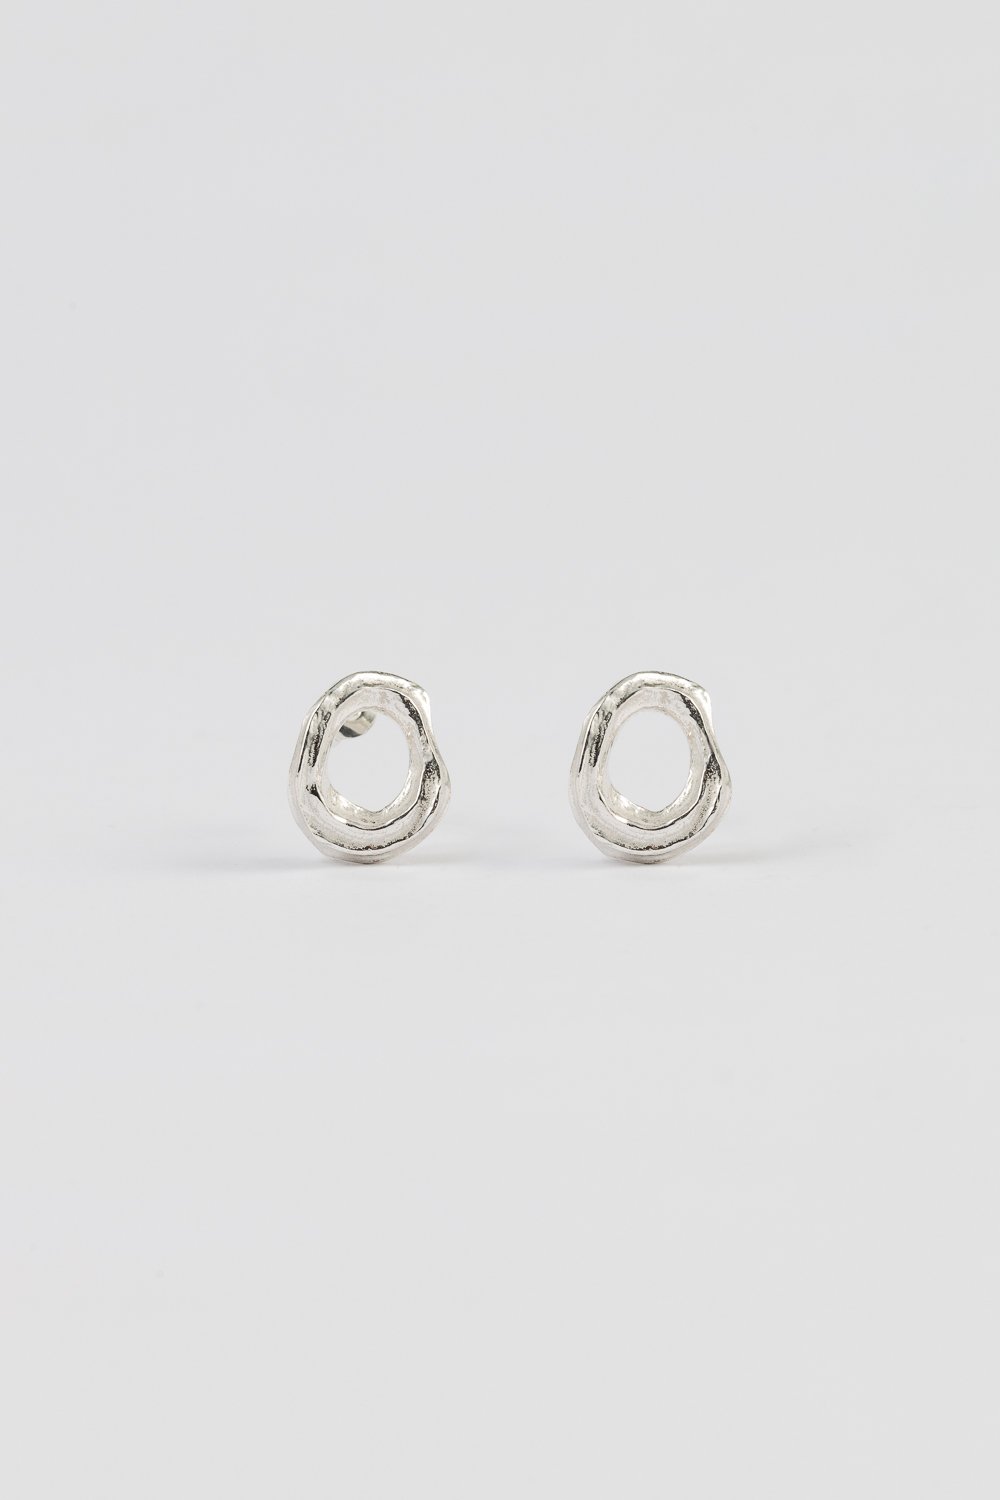 Image of canthus earrings